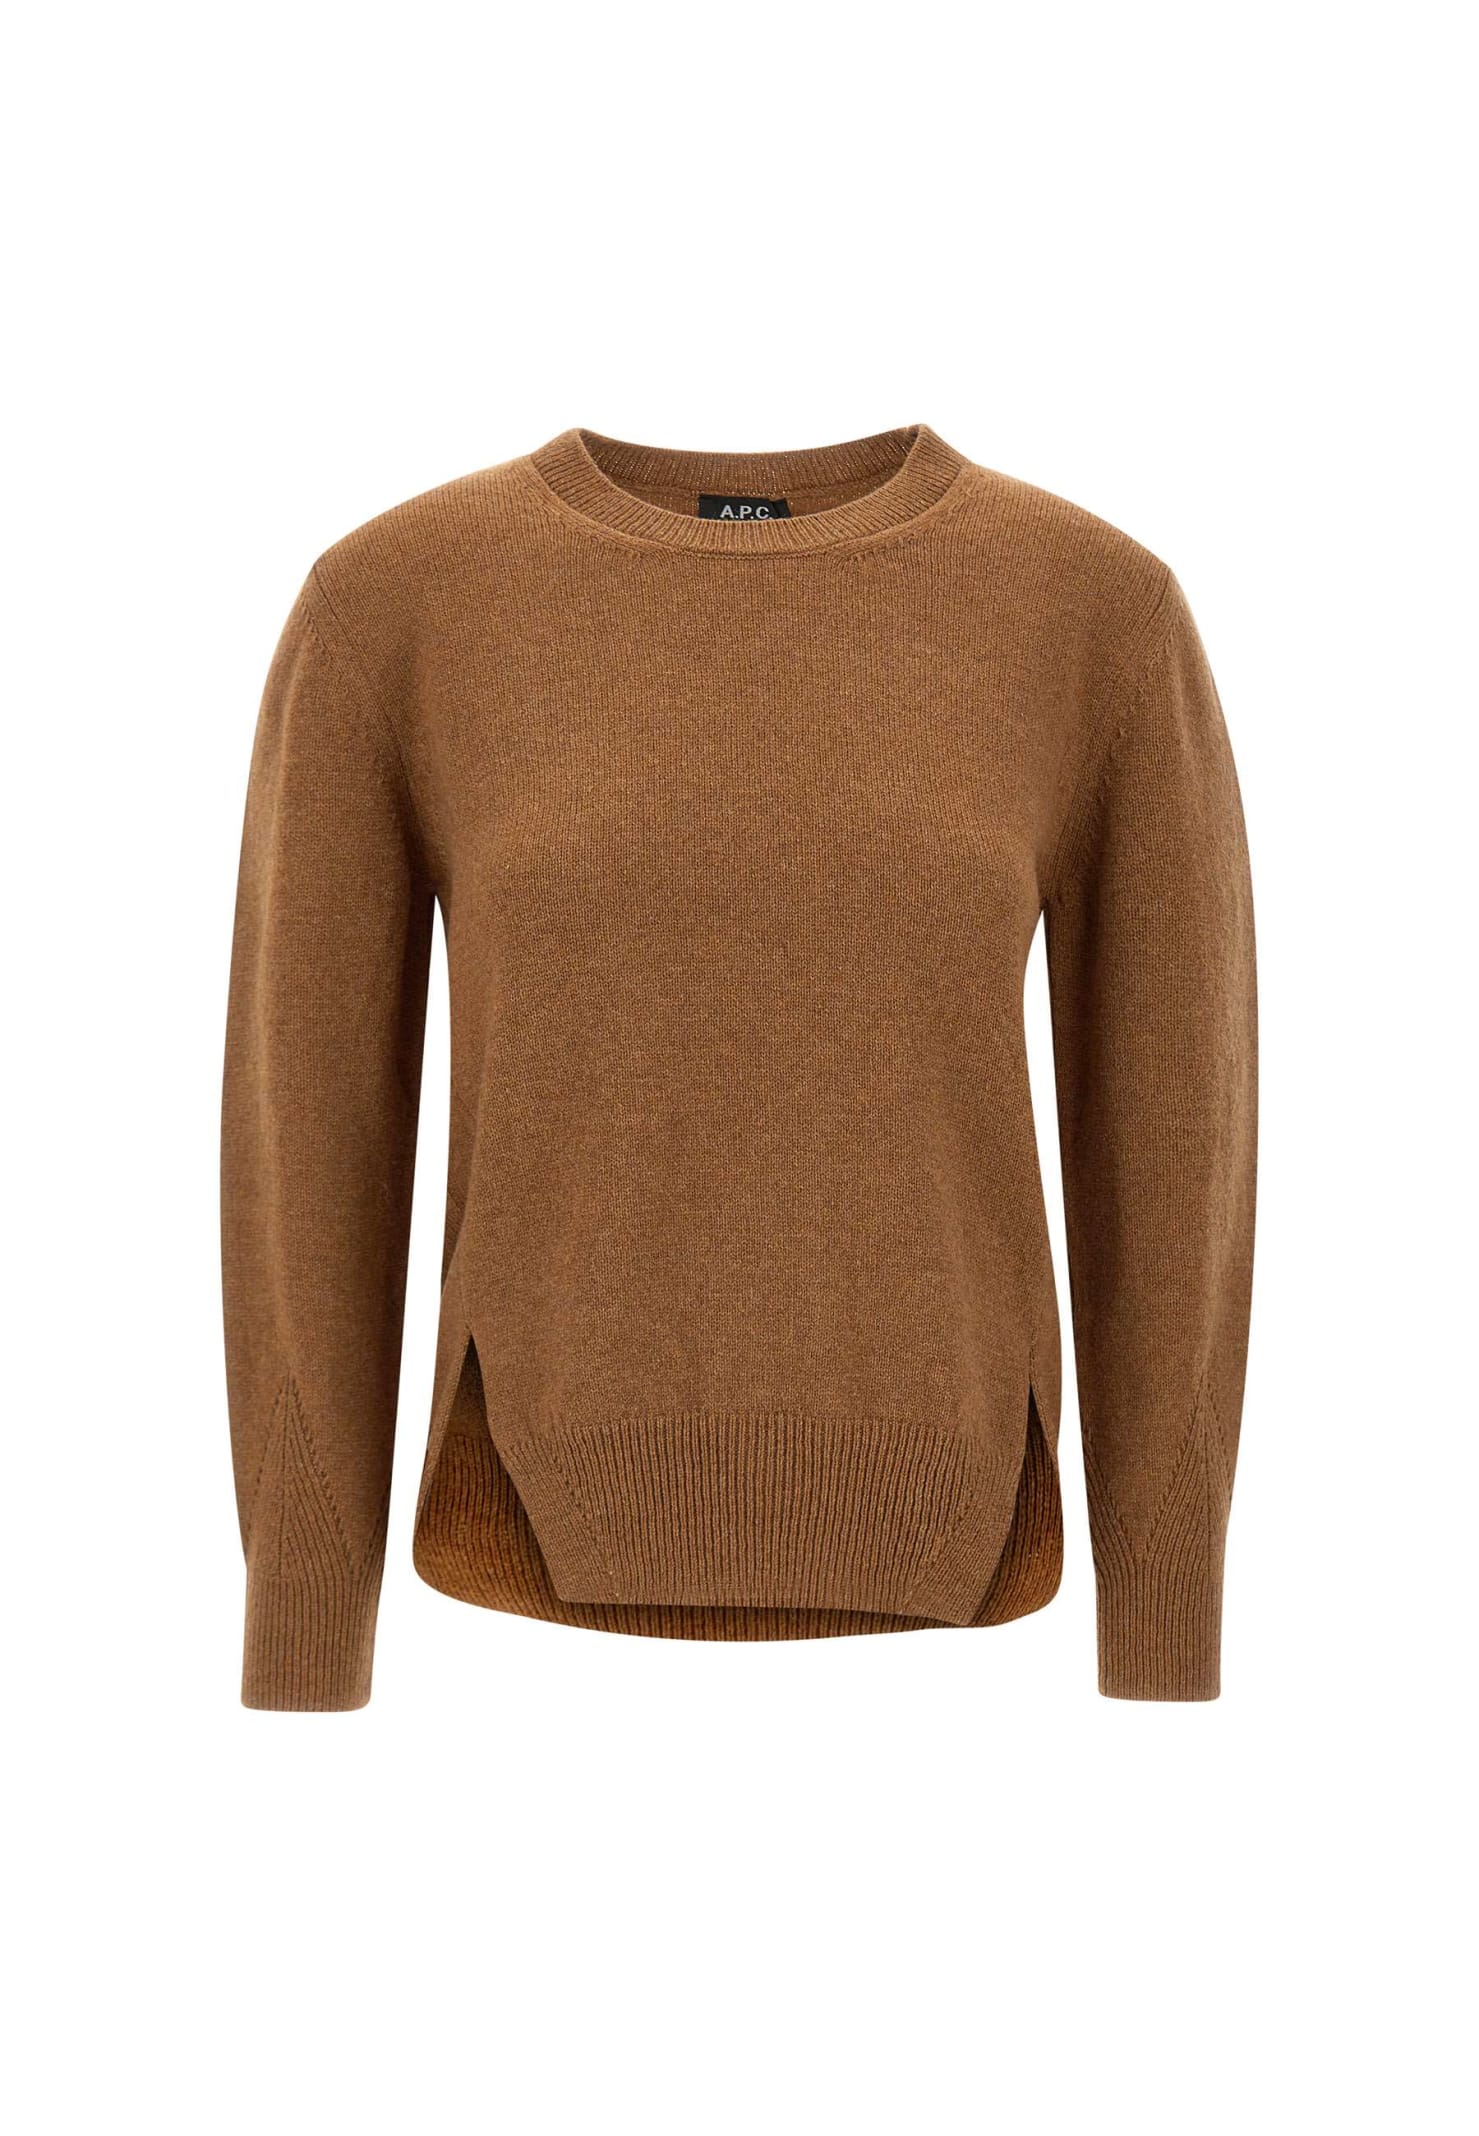 Apc Lucy Merino Wool Pullover In Brown